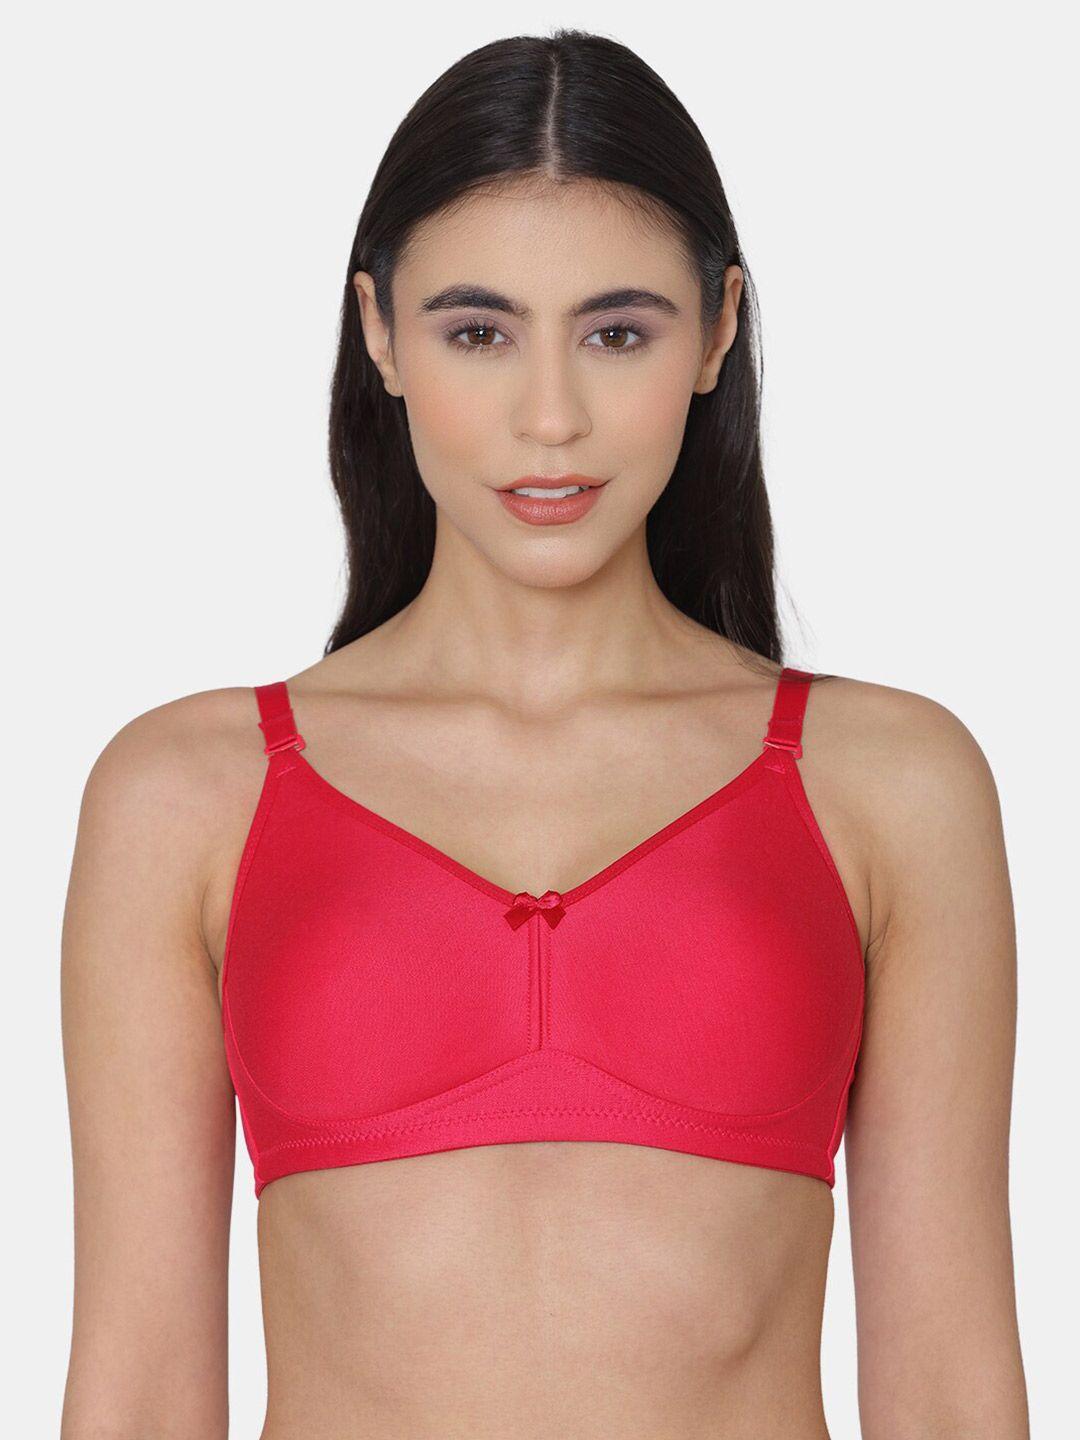 tweens super support cotton minimizer bra with full coverage